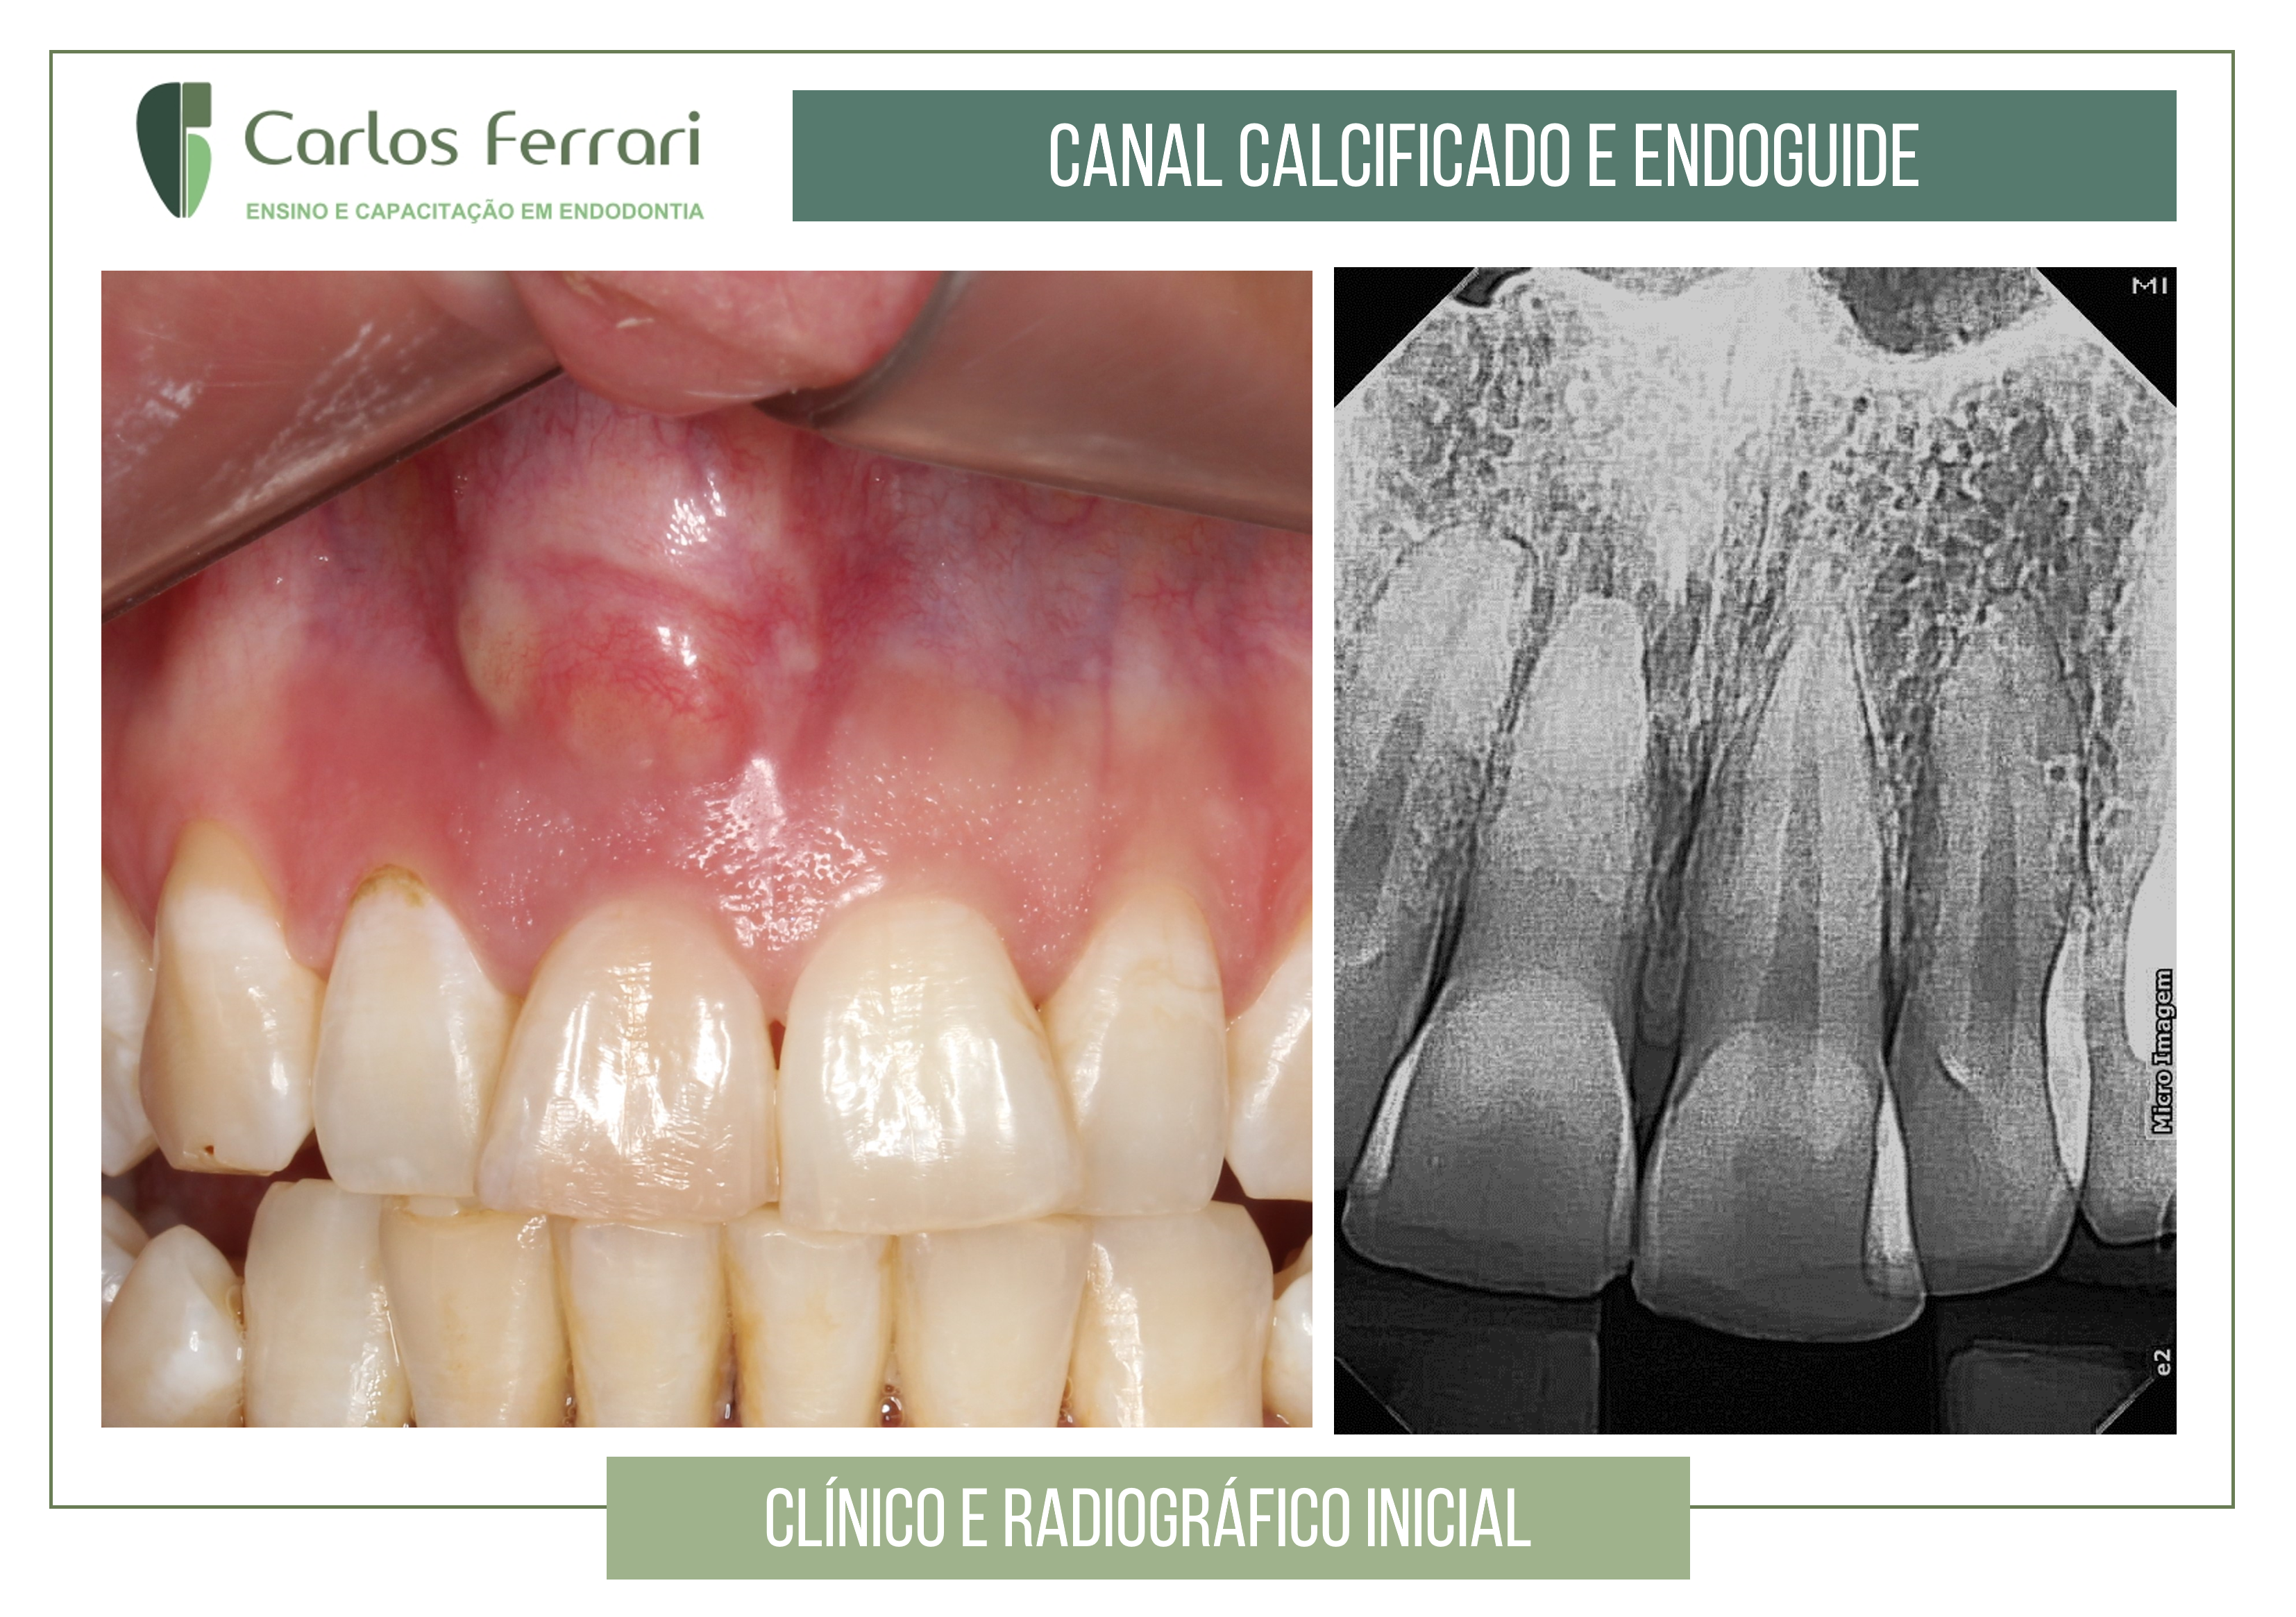 You are currently viewing Endoguide in calcified canal